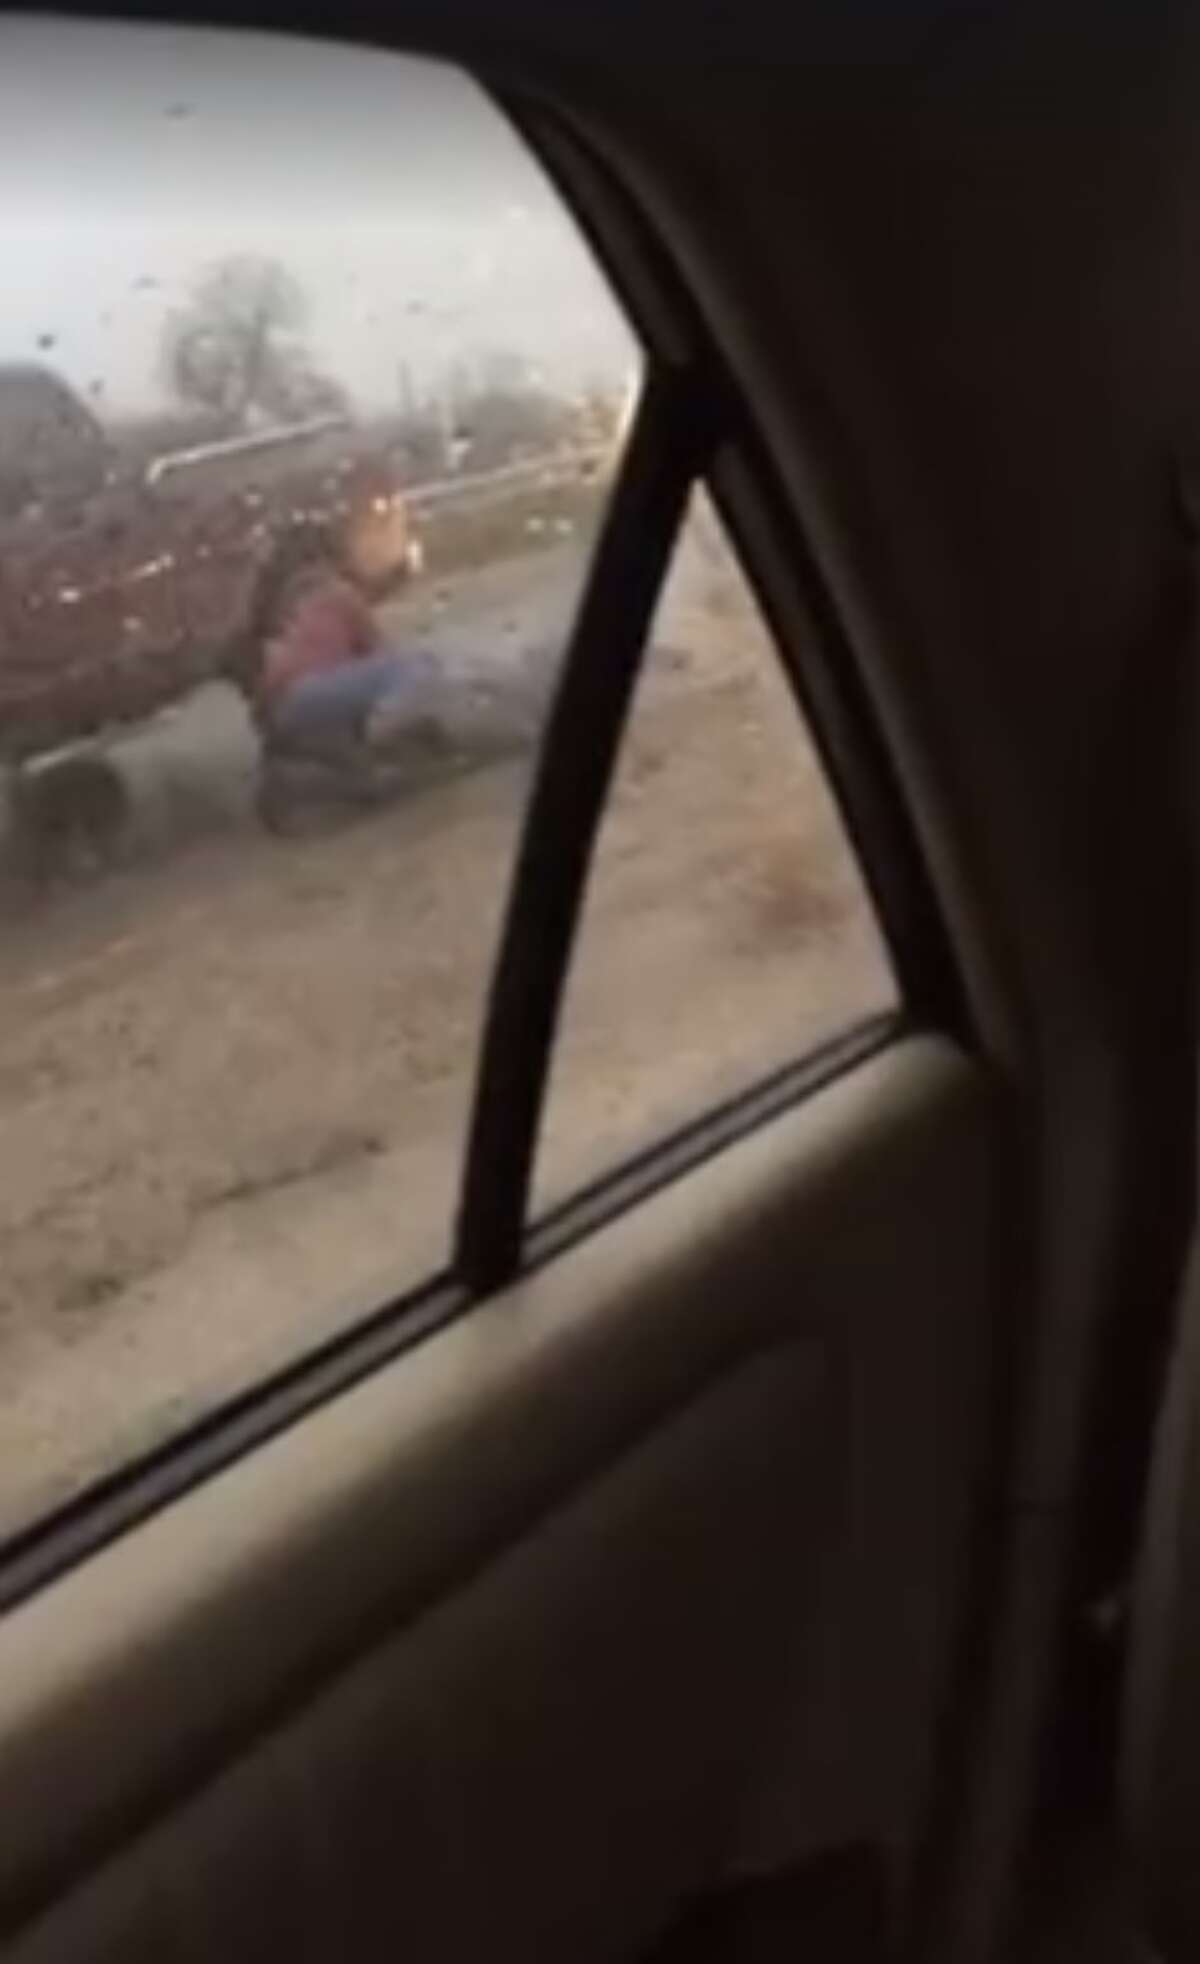 A motorist caught on video, which she later posted to Facebook, an altercation between two other drivers on U.S. 90, Thursday morning during her morning commute. The video shows one man kicking another in the head and running off to his vehicle and driving off. The video did not show what led to the fight.